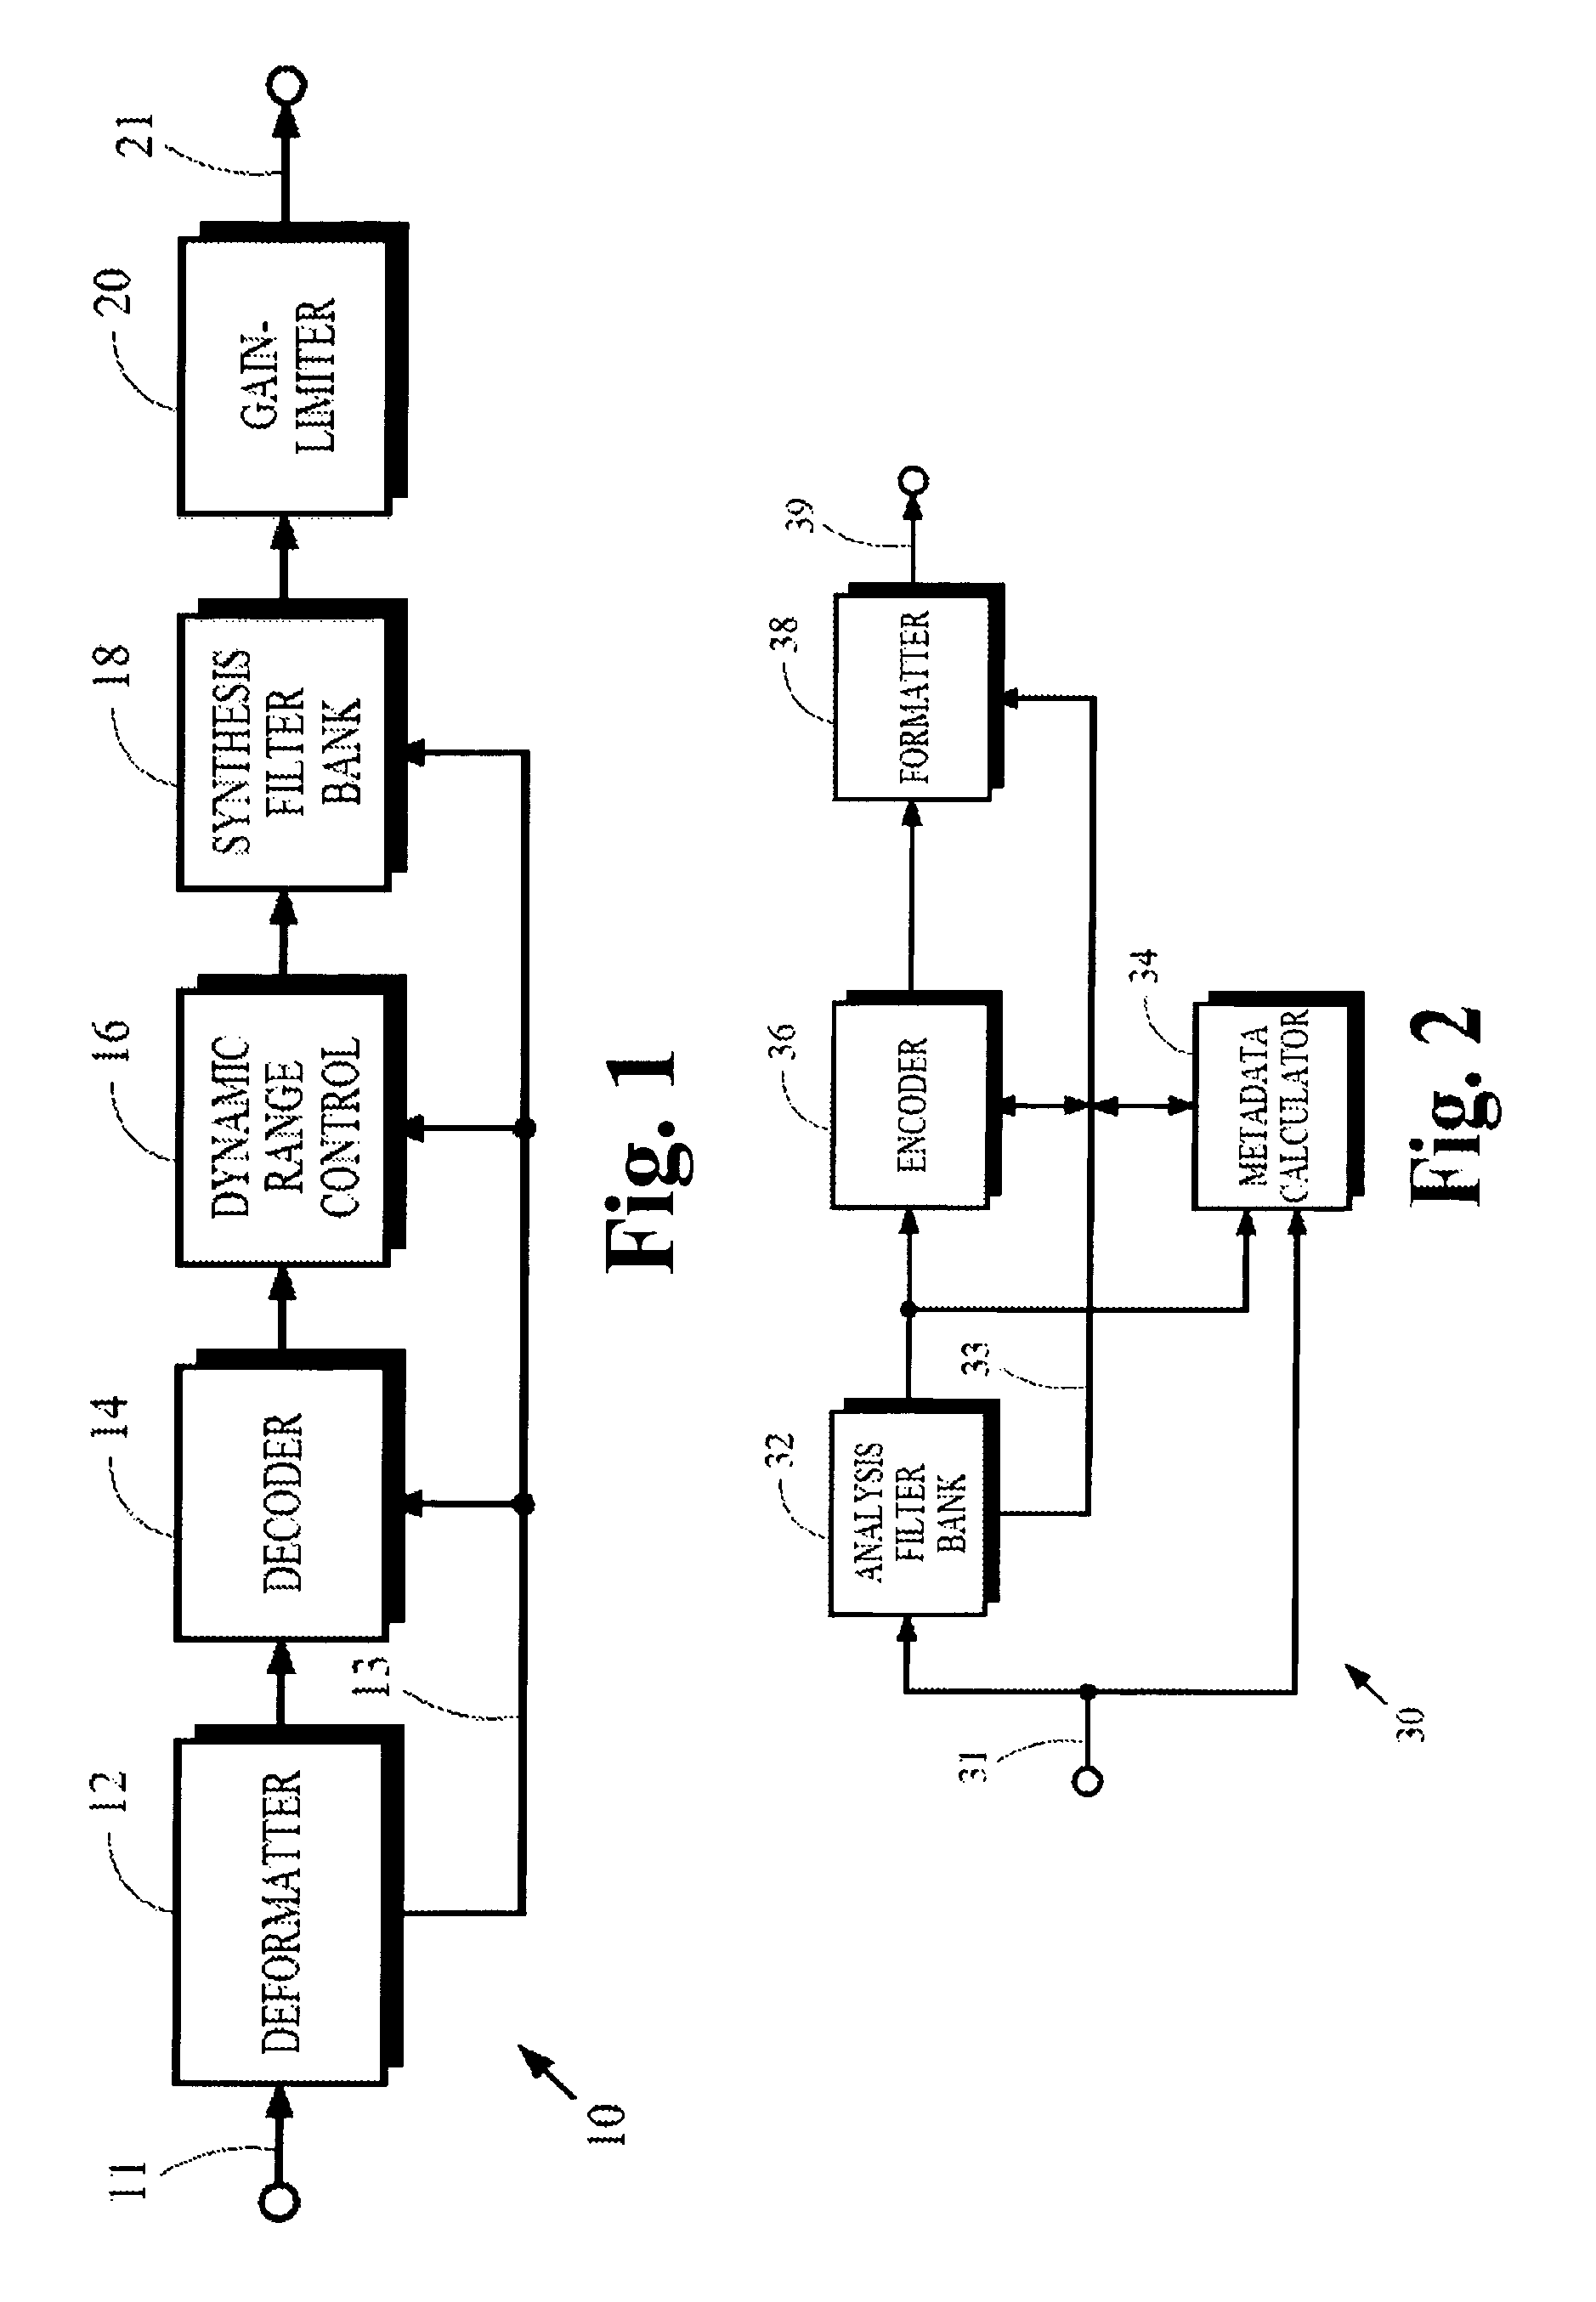 System and method for non-destructively normalizing loudness of audio signals within portable devices